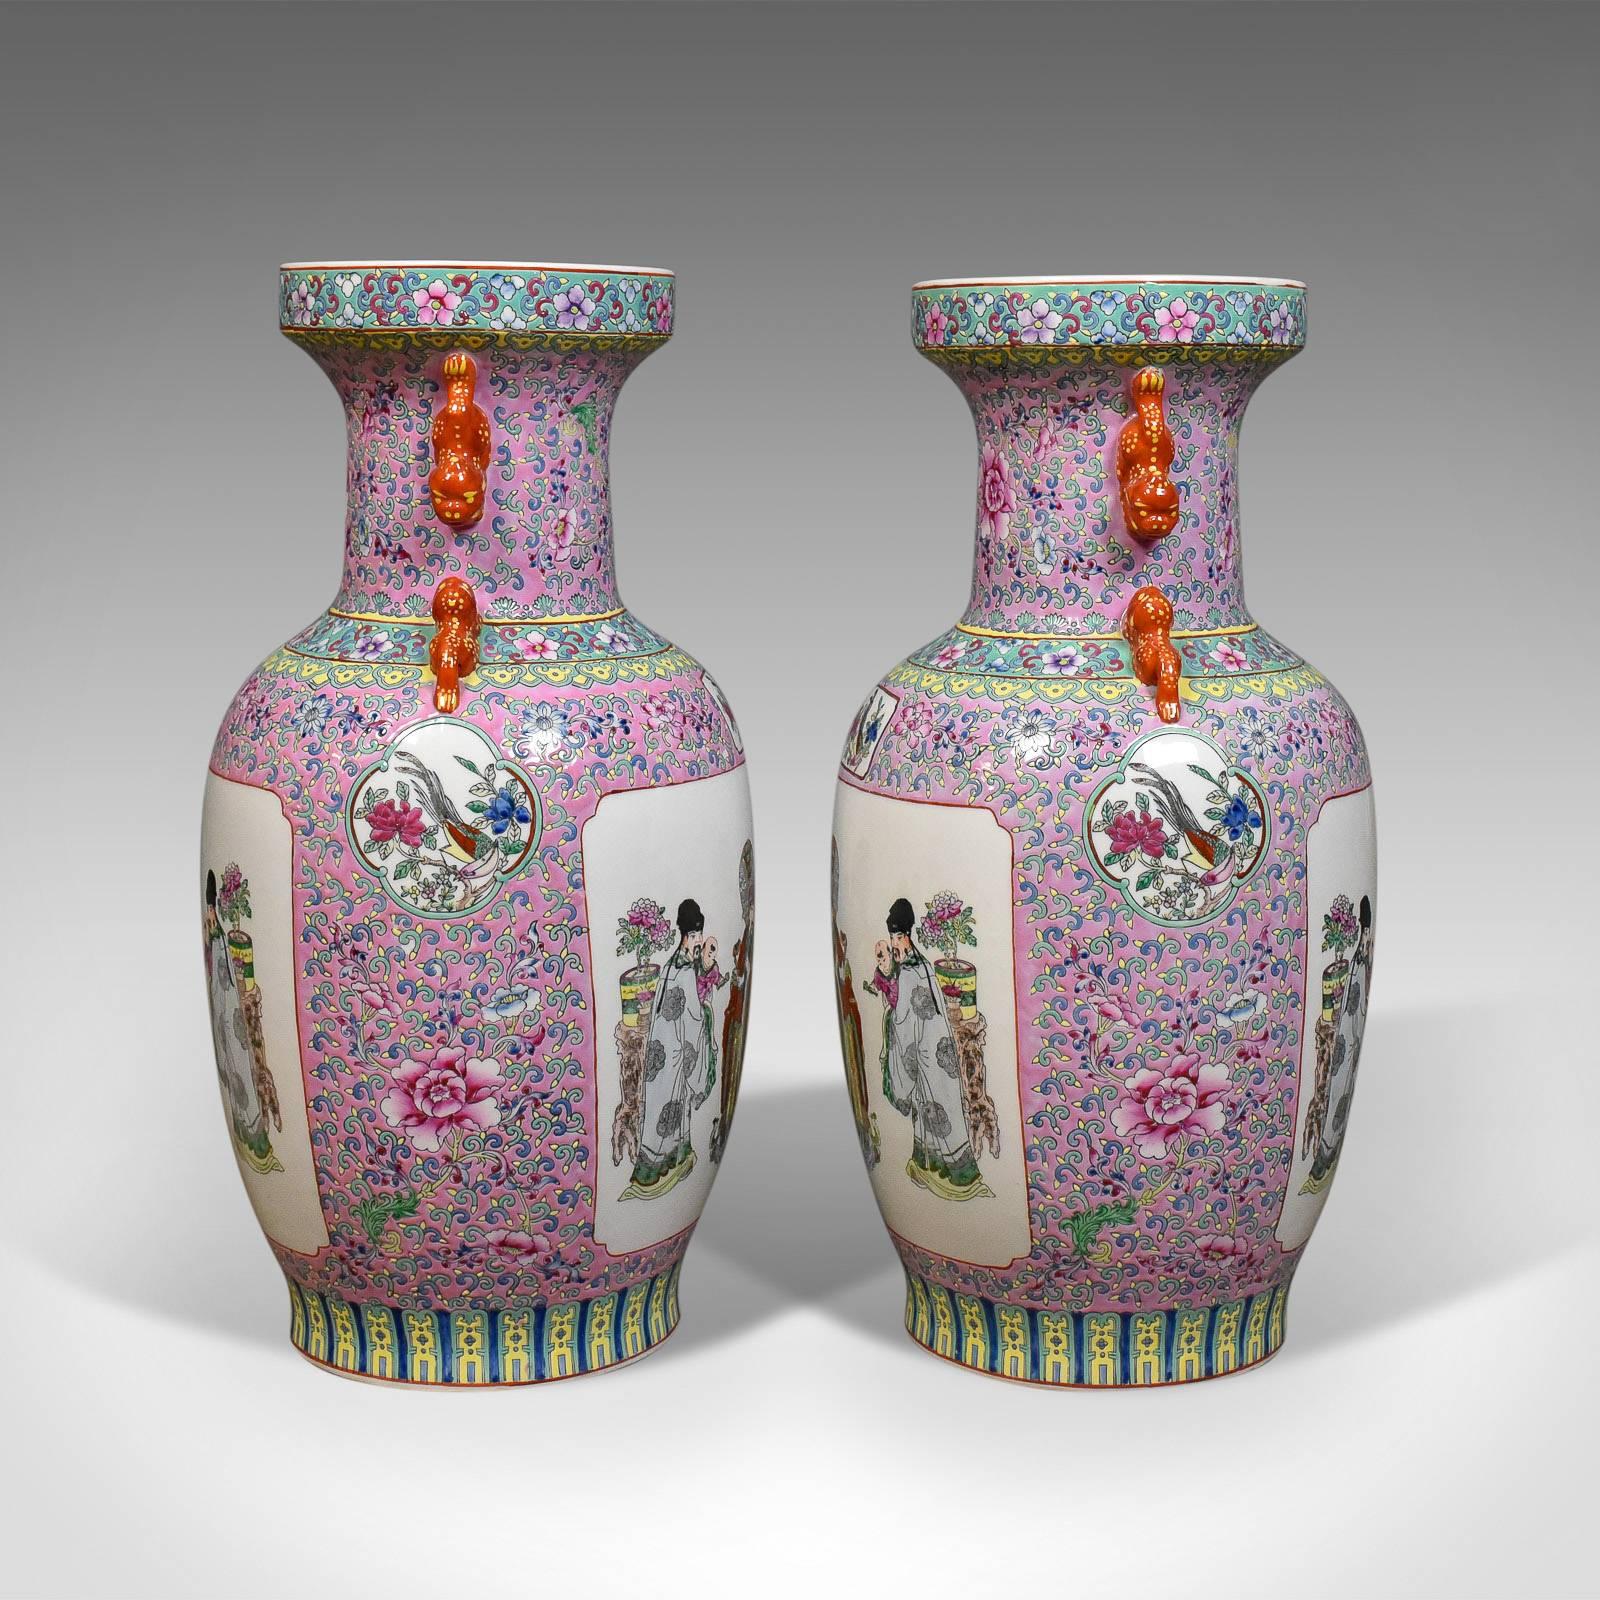 This is a midcentury pair of Chinese baluster vases, hand-painted ceramic urns. 

Imposing quality pair of ceramic vases 
Profusely decorated in blushes and reds
Free-from any damage or marks

Intense floral design to the neck and framing the